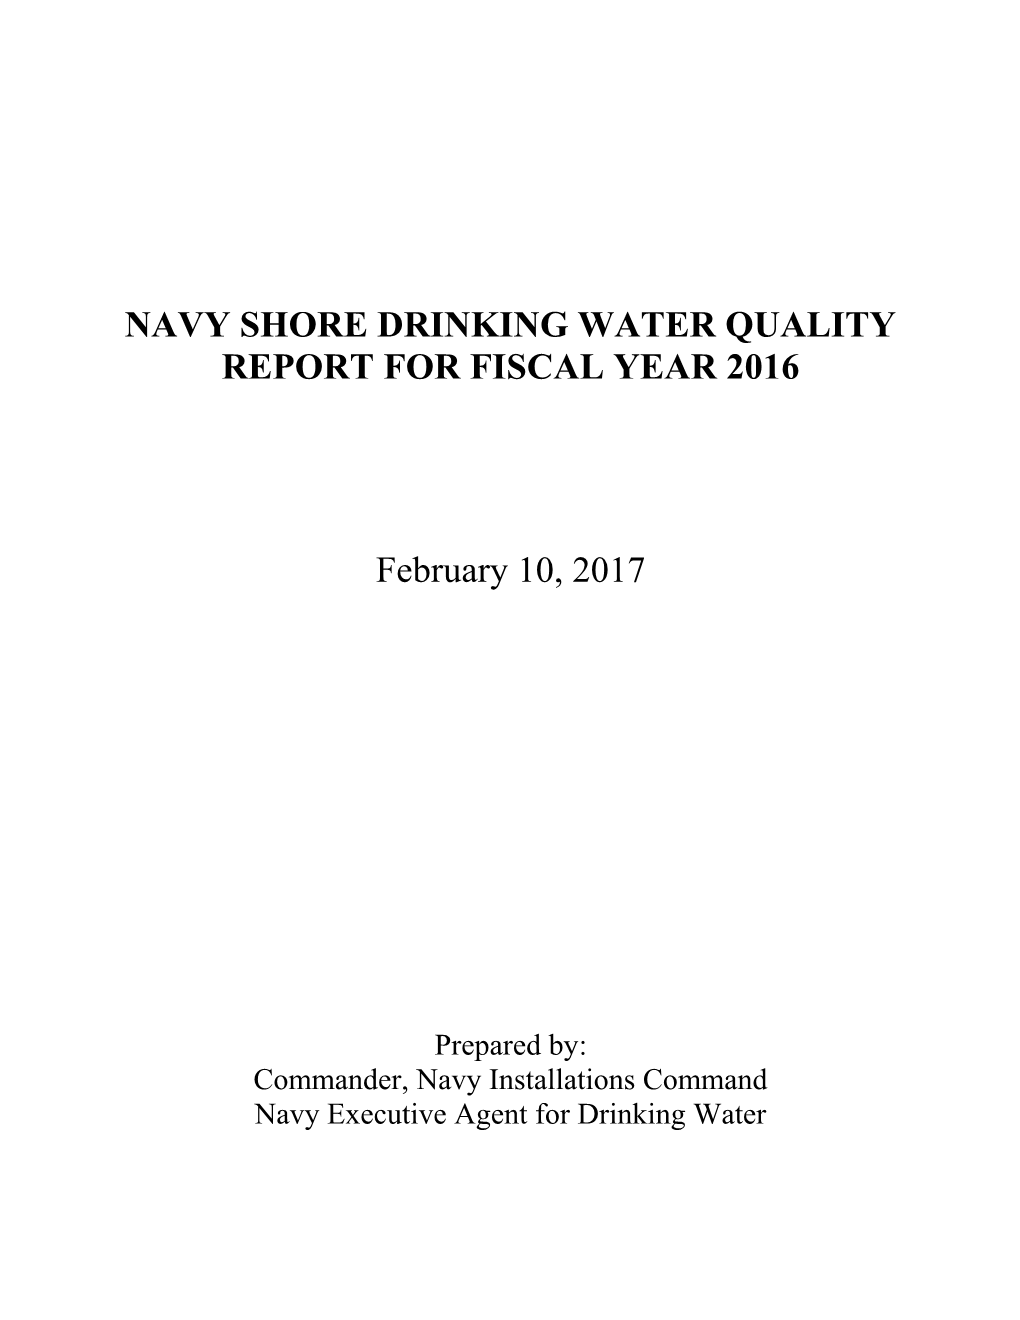 Navy Shore Drinking Water Quality Report for Fiscal Year 2016